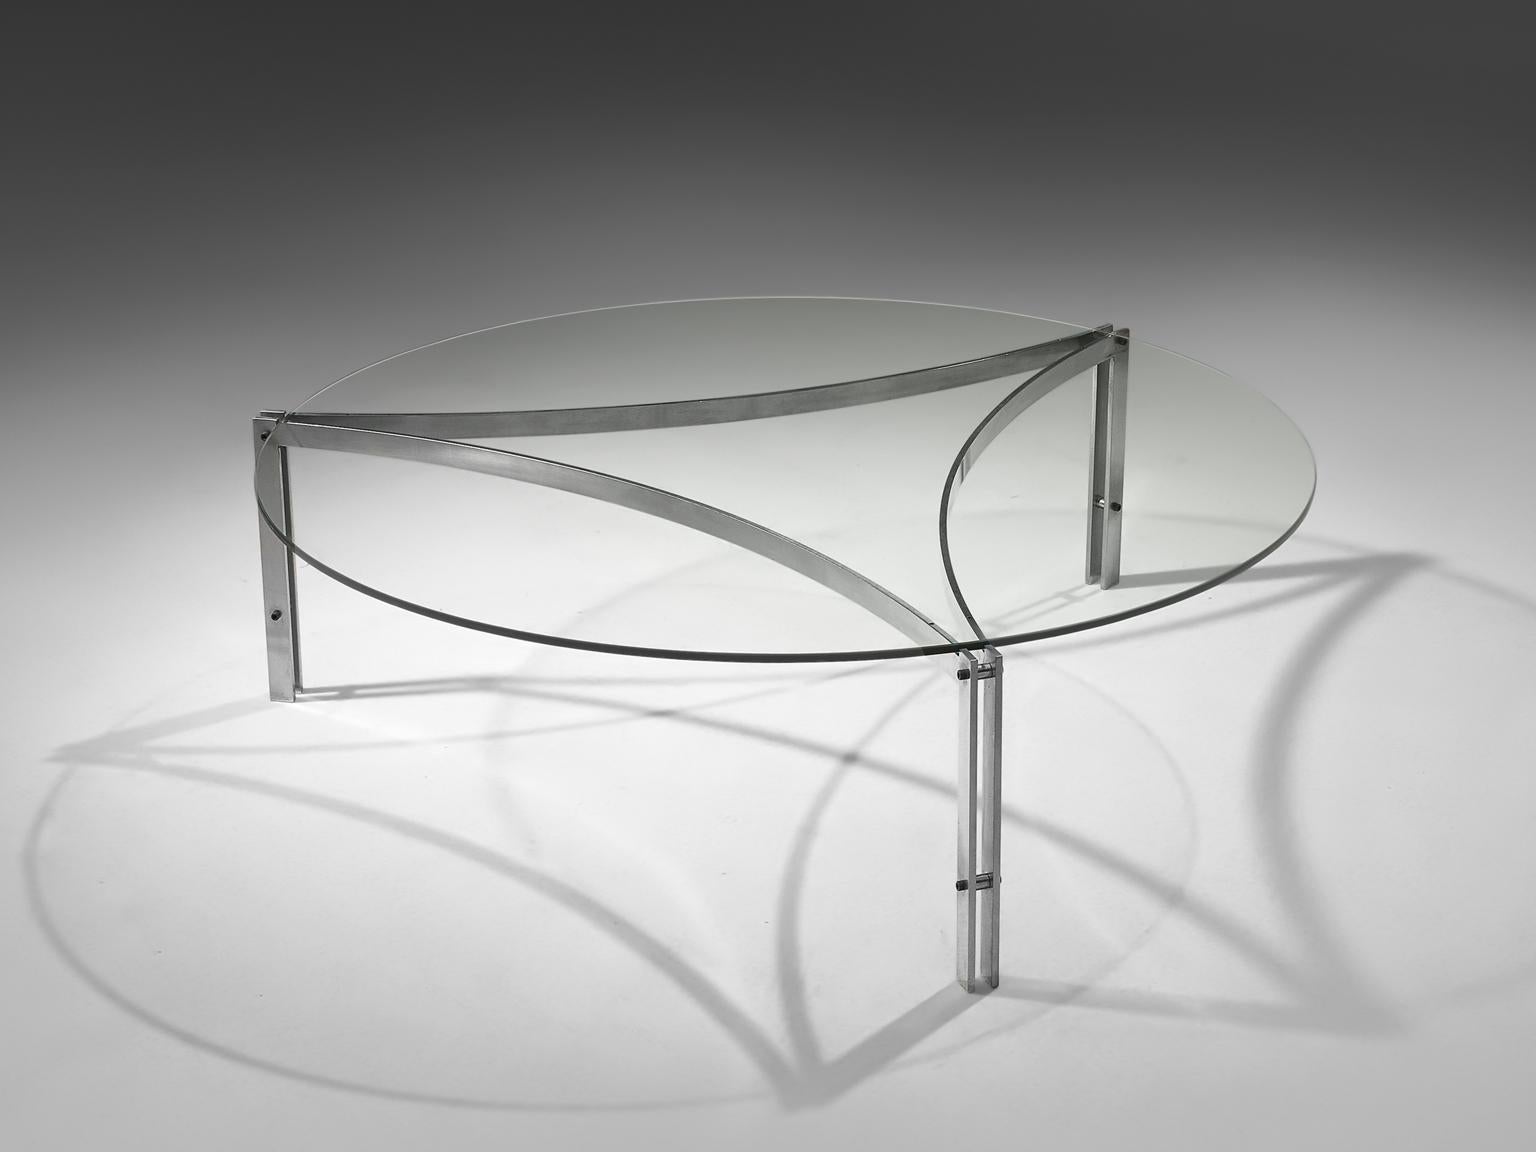 Round coffee table in glass and stainless steel, Denmark, 1970s. 

This modern, elegant coffee table stands out for its simplicity. Exposing it's refined yet strong frame, this piece is beautifully balanced in its graphic design. 
Designed in the